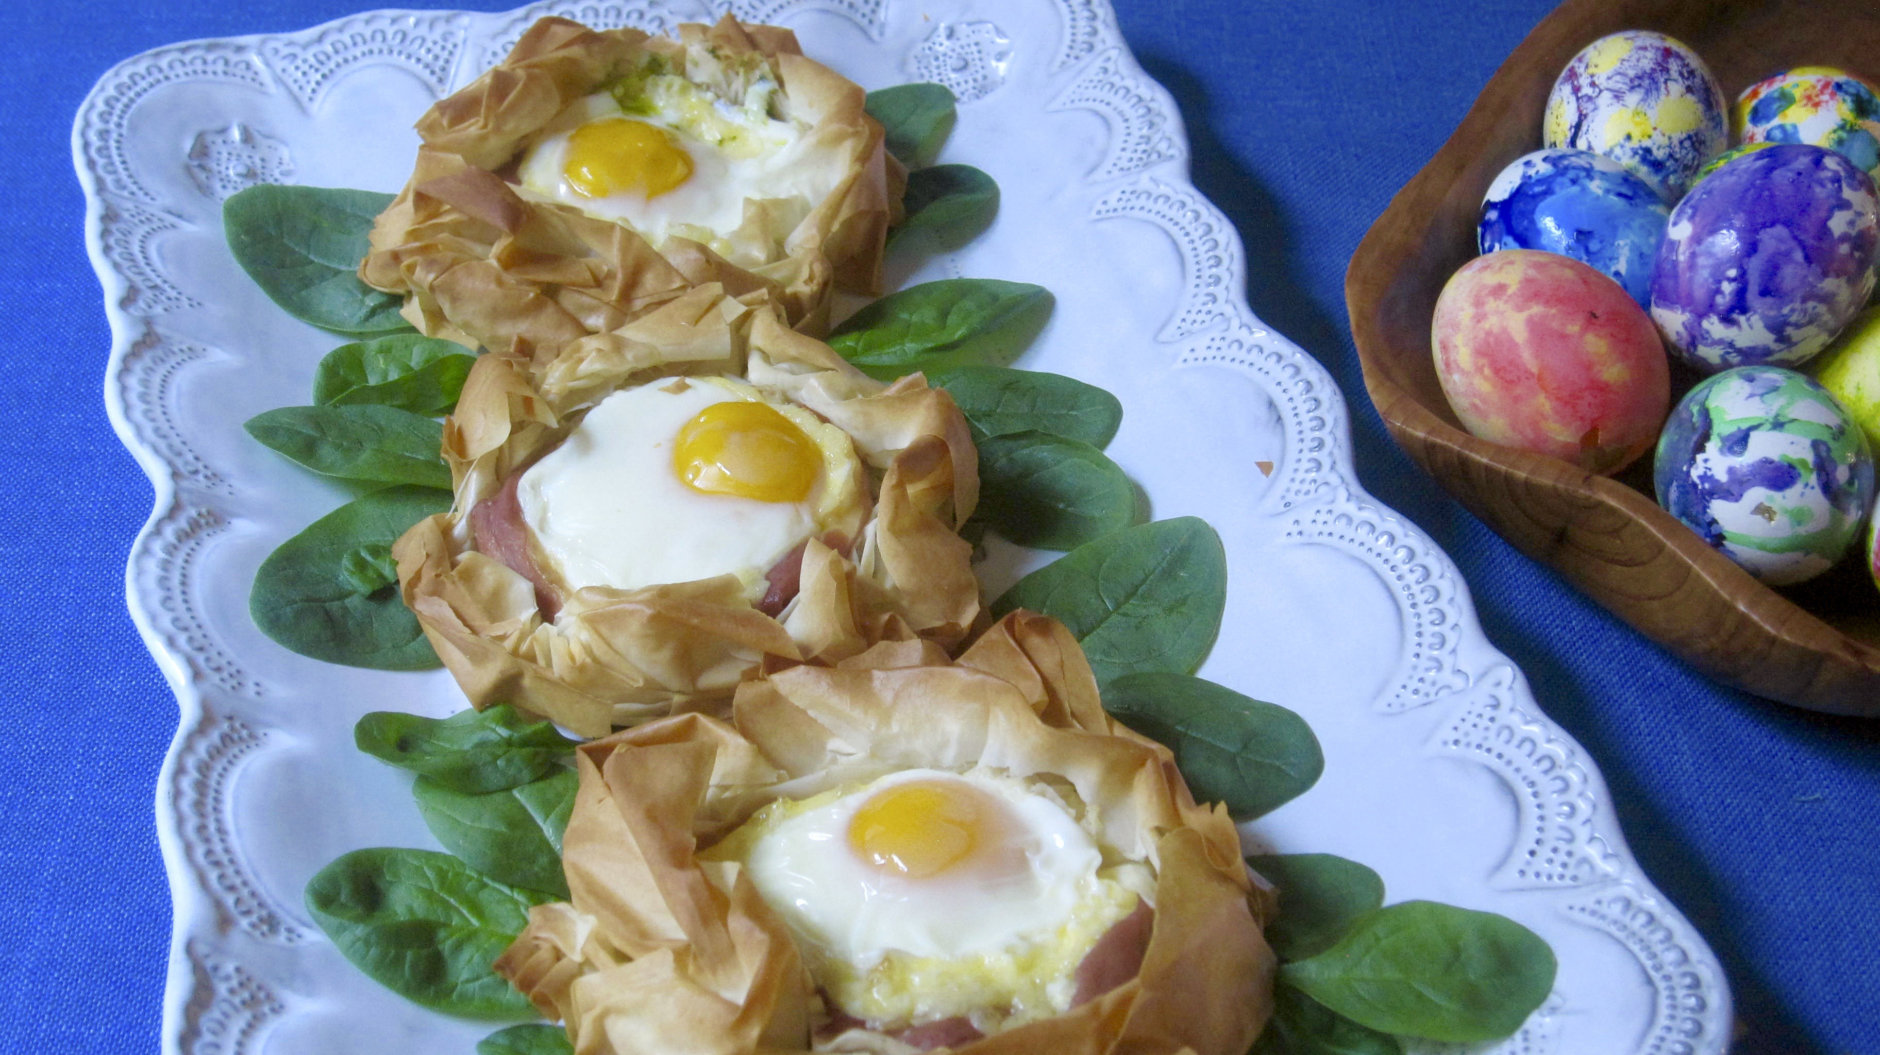 This March 2018 photo shows eggs baked in pastry nests made of phyllo in New York. This dish is from a recipe by Sara Moulton. (Sara Moulton via AP)